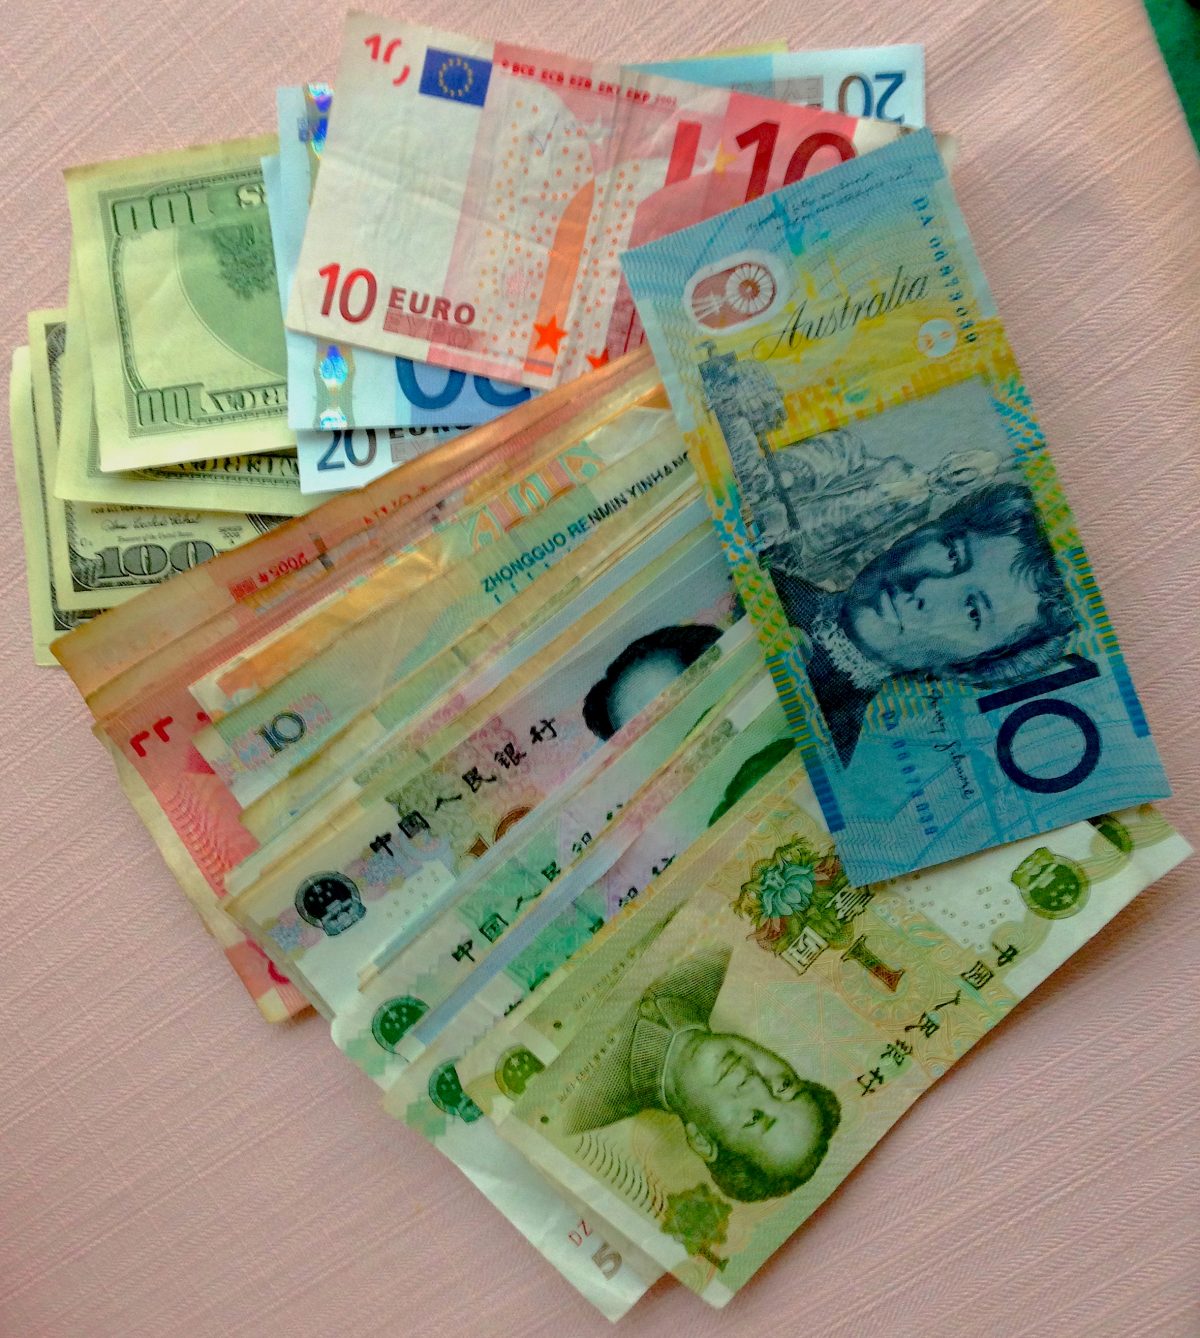 The assortment of currencies I had with me in NK